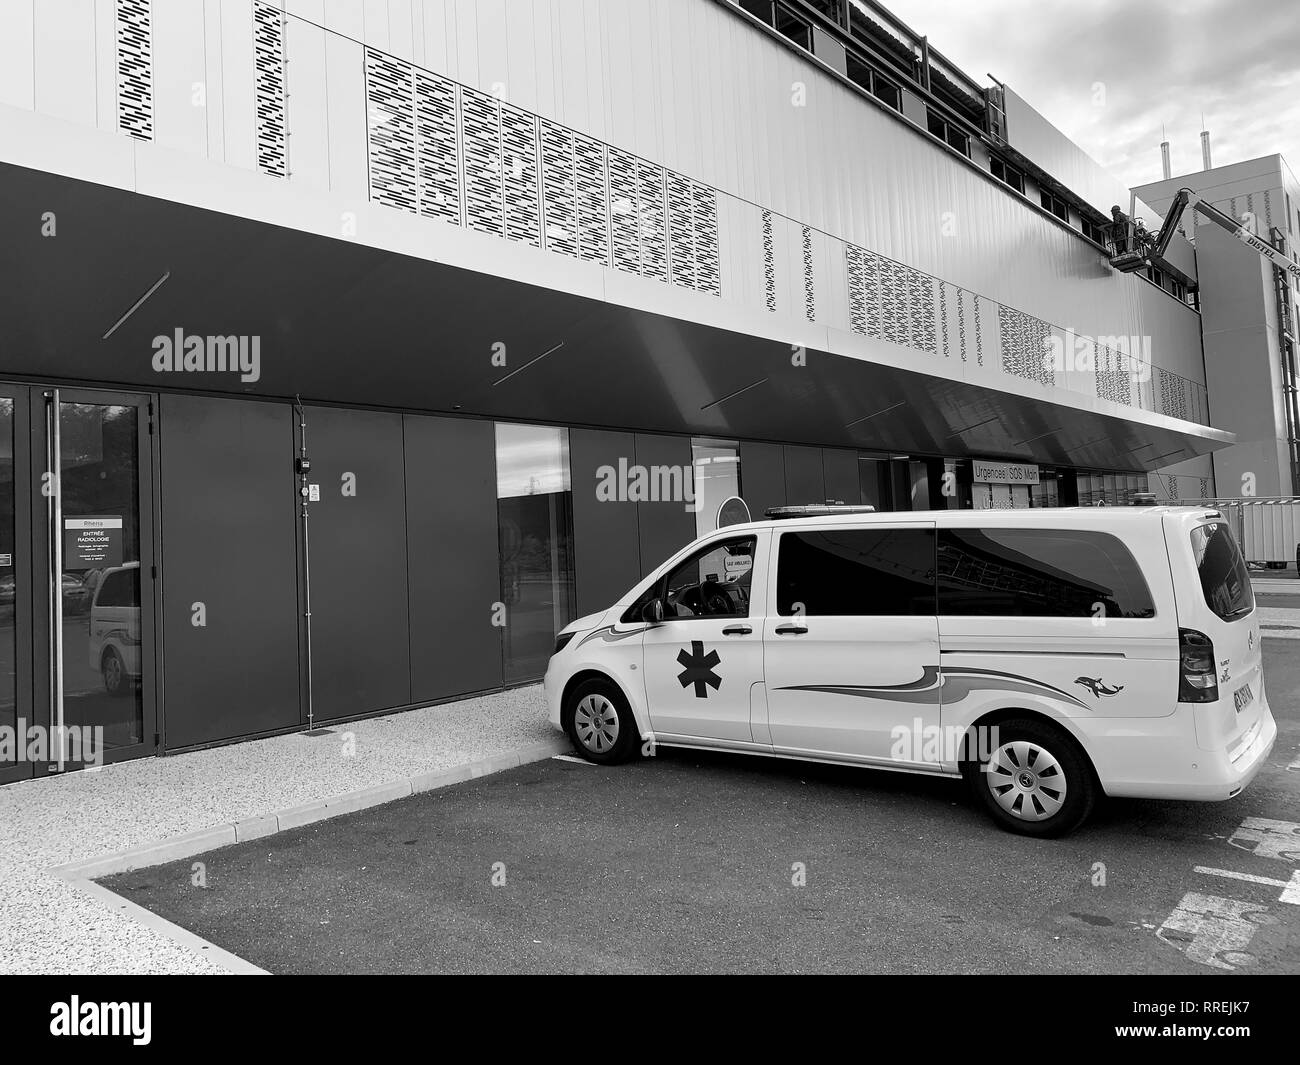 STRASBOURG, FRANCE - OCT 2, 2018: White ambulance van parked in front of hospital Rhena - the new hospital in Strasbourg - black and white Stock Photo